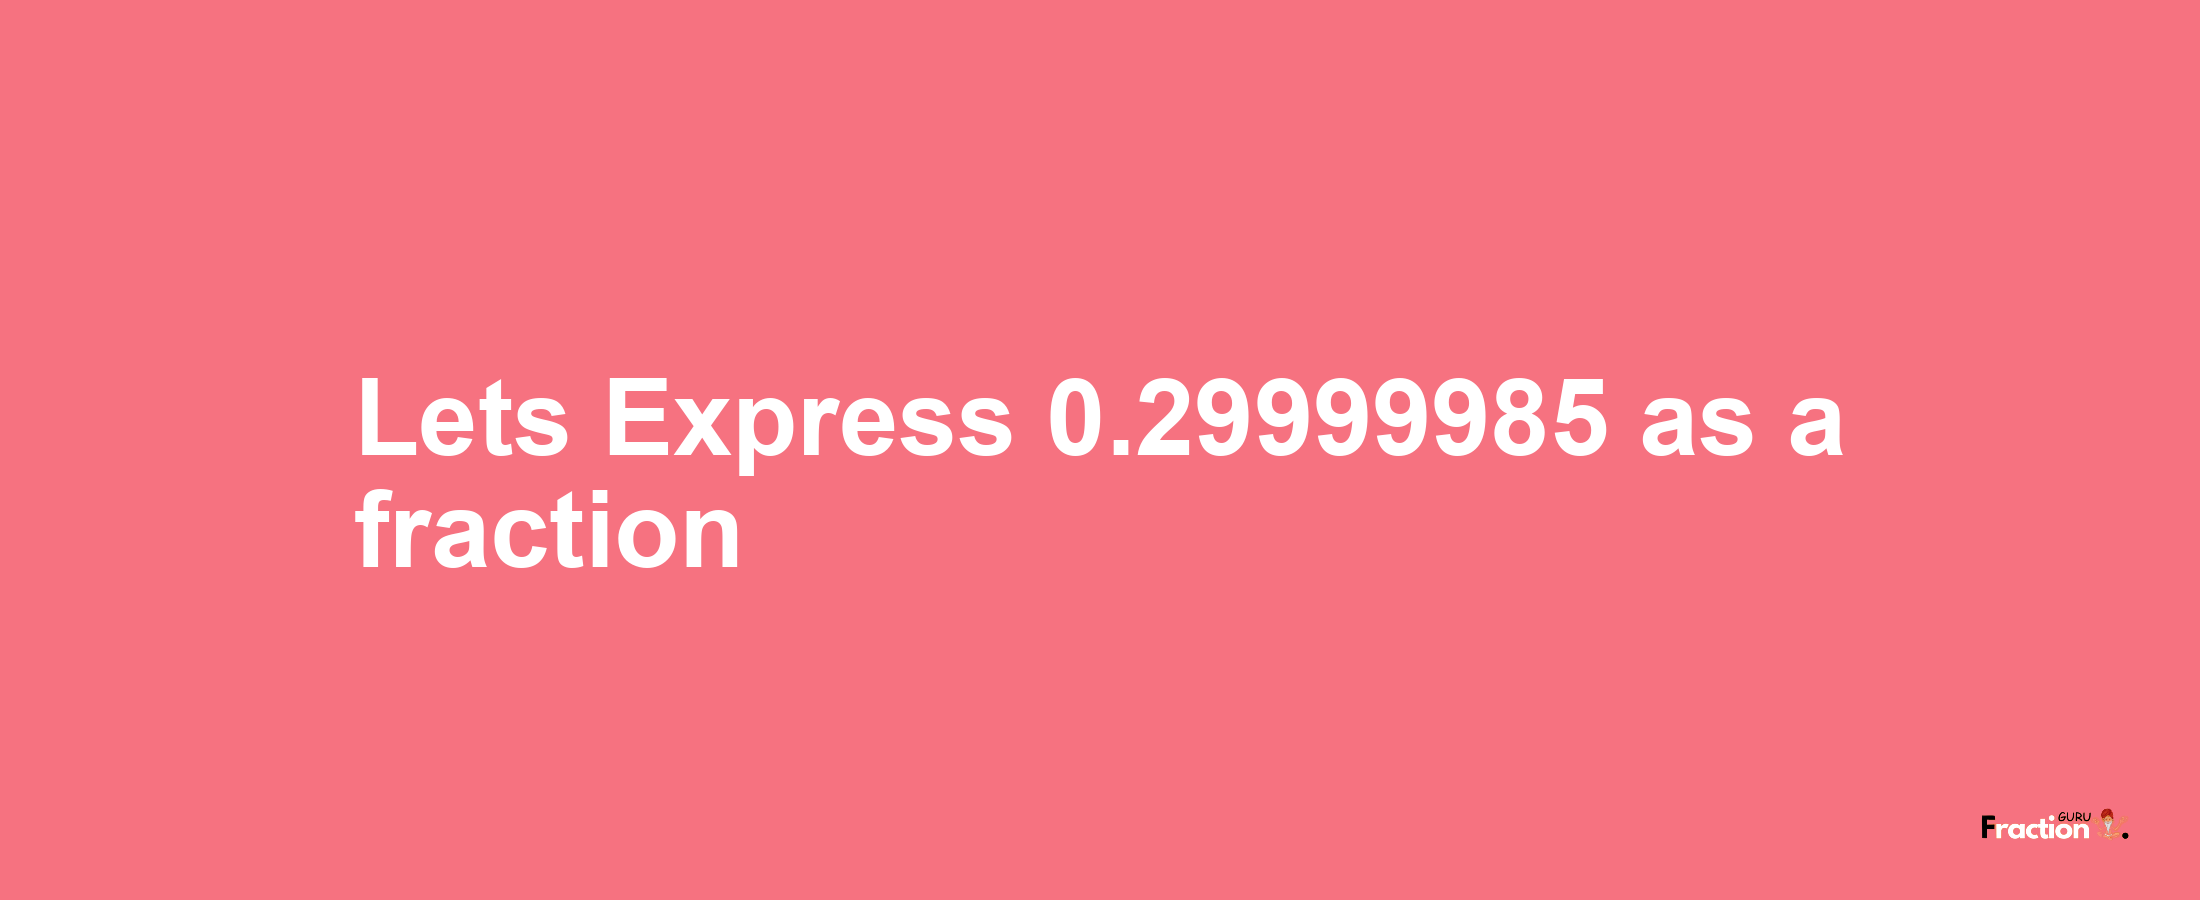 Lets Express 0.29999985 as afraction